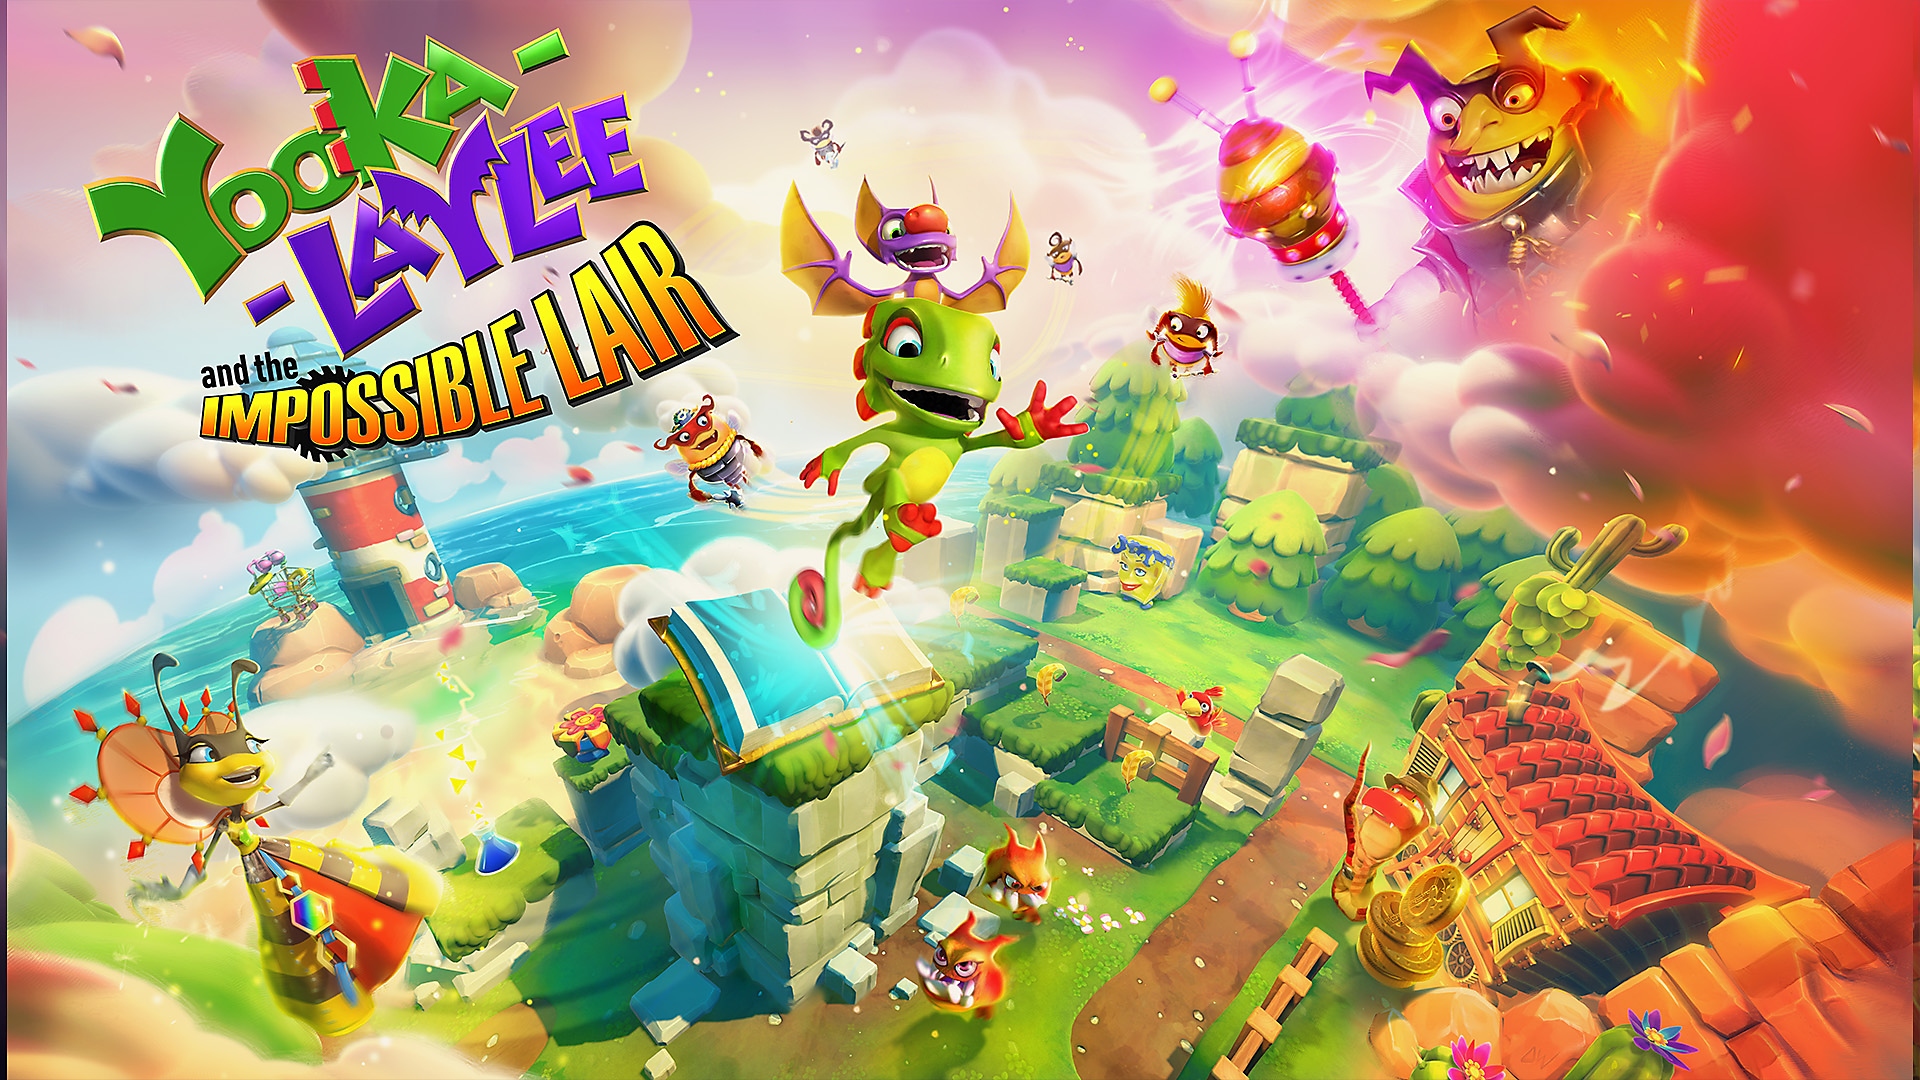 Yooka-Laylee and the Impossible Lair – Trailer